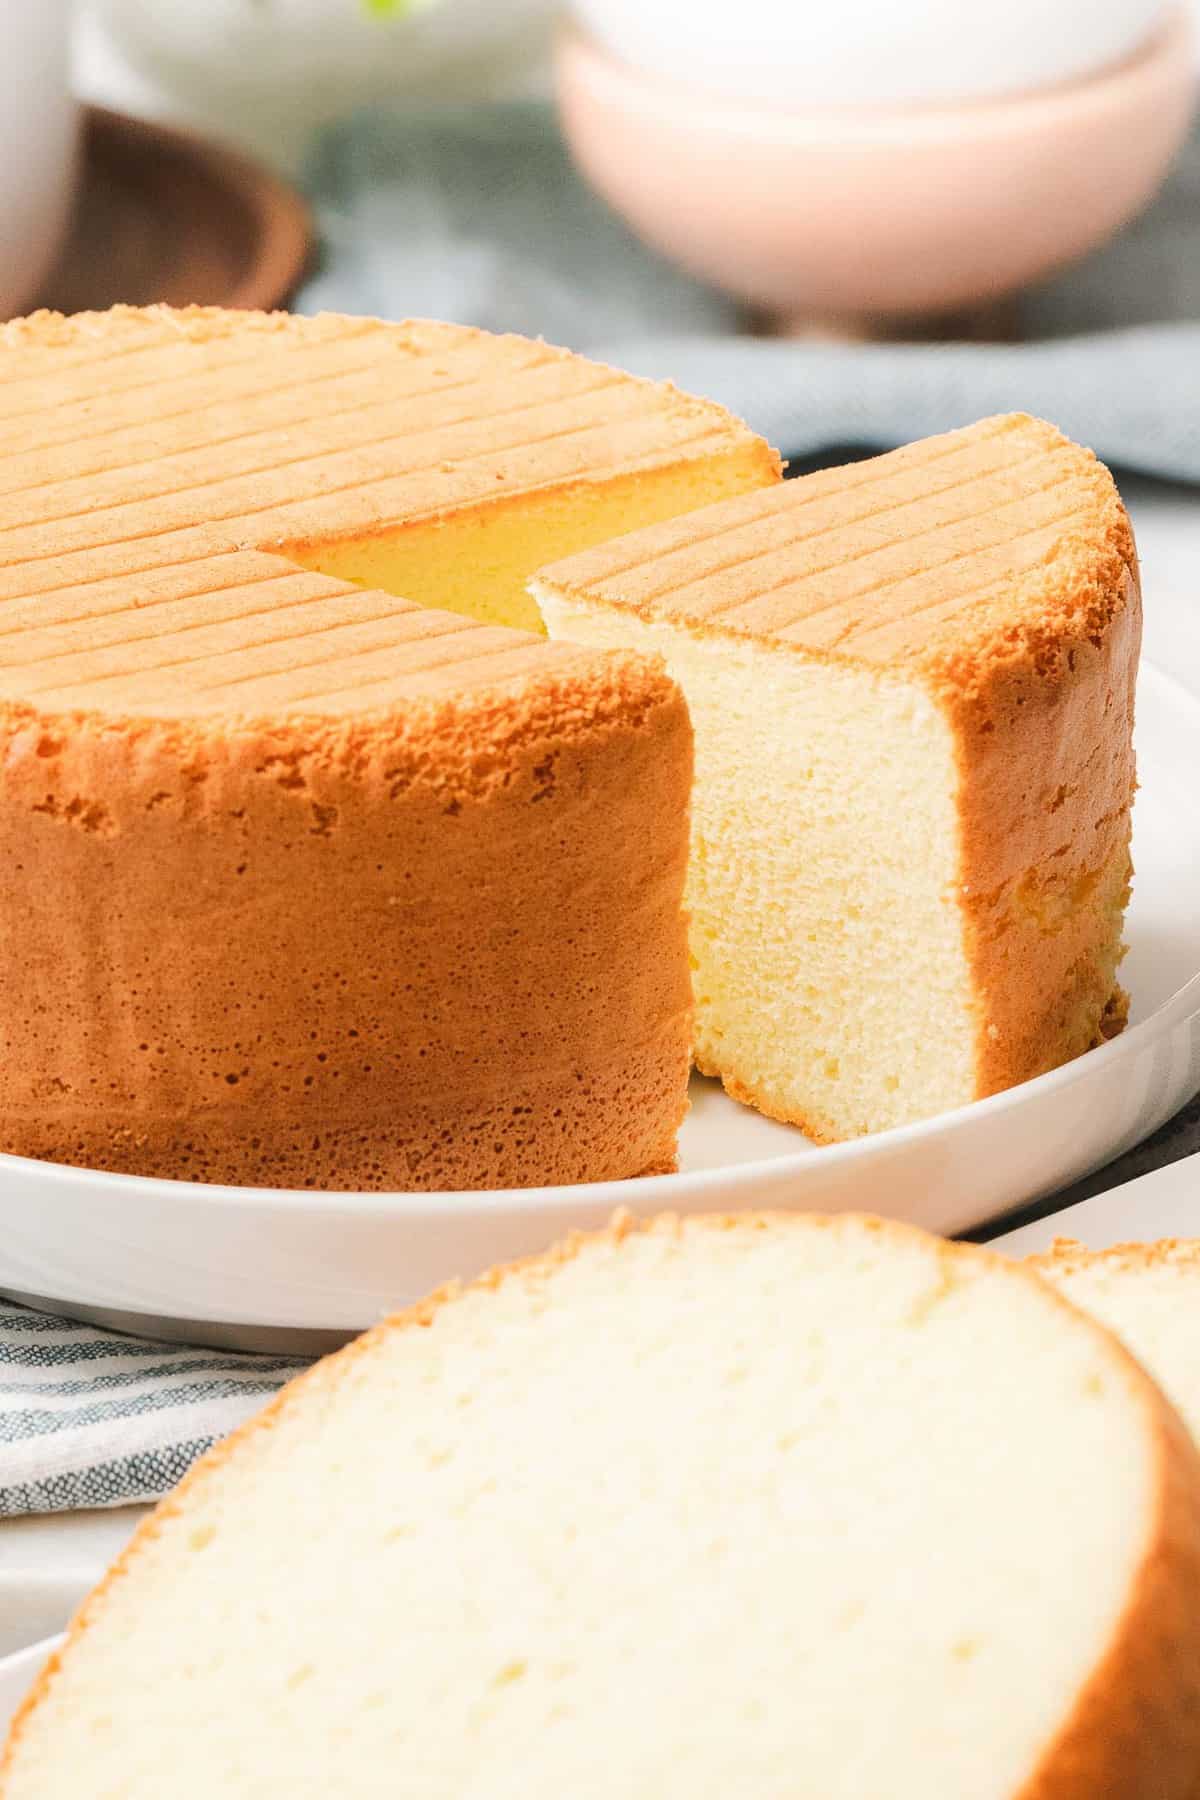 Easy sponge cake with light and fluffy texture cut into a slice.